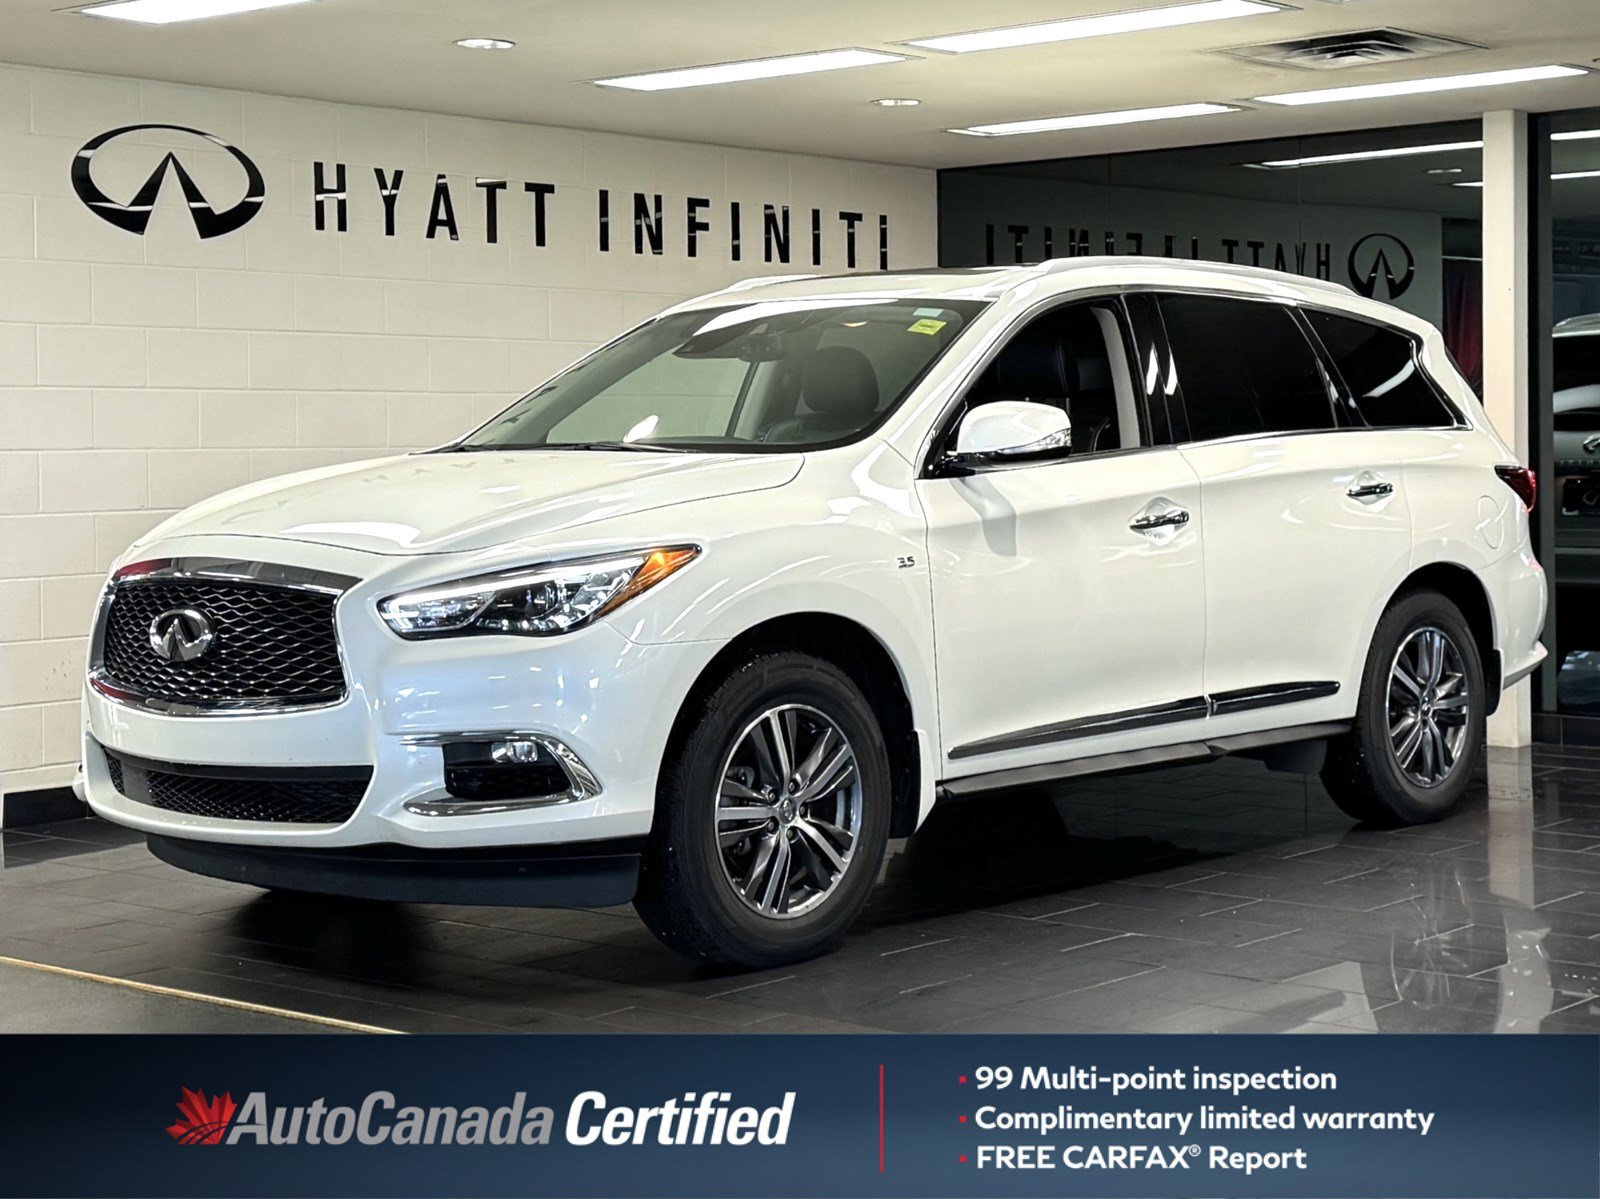 2020 Infiniti QX60 PURE - One Owner | 3rd Row Seat | Sunroof | Backup